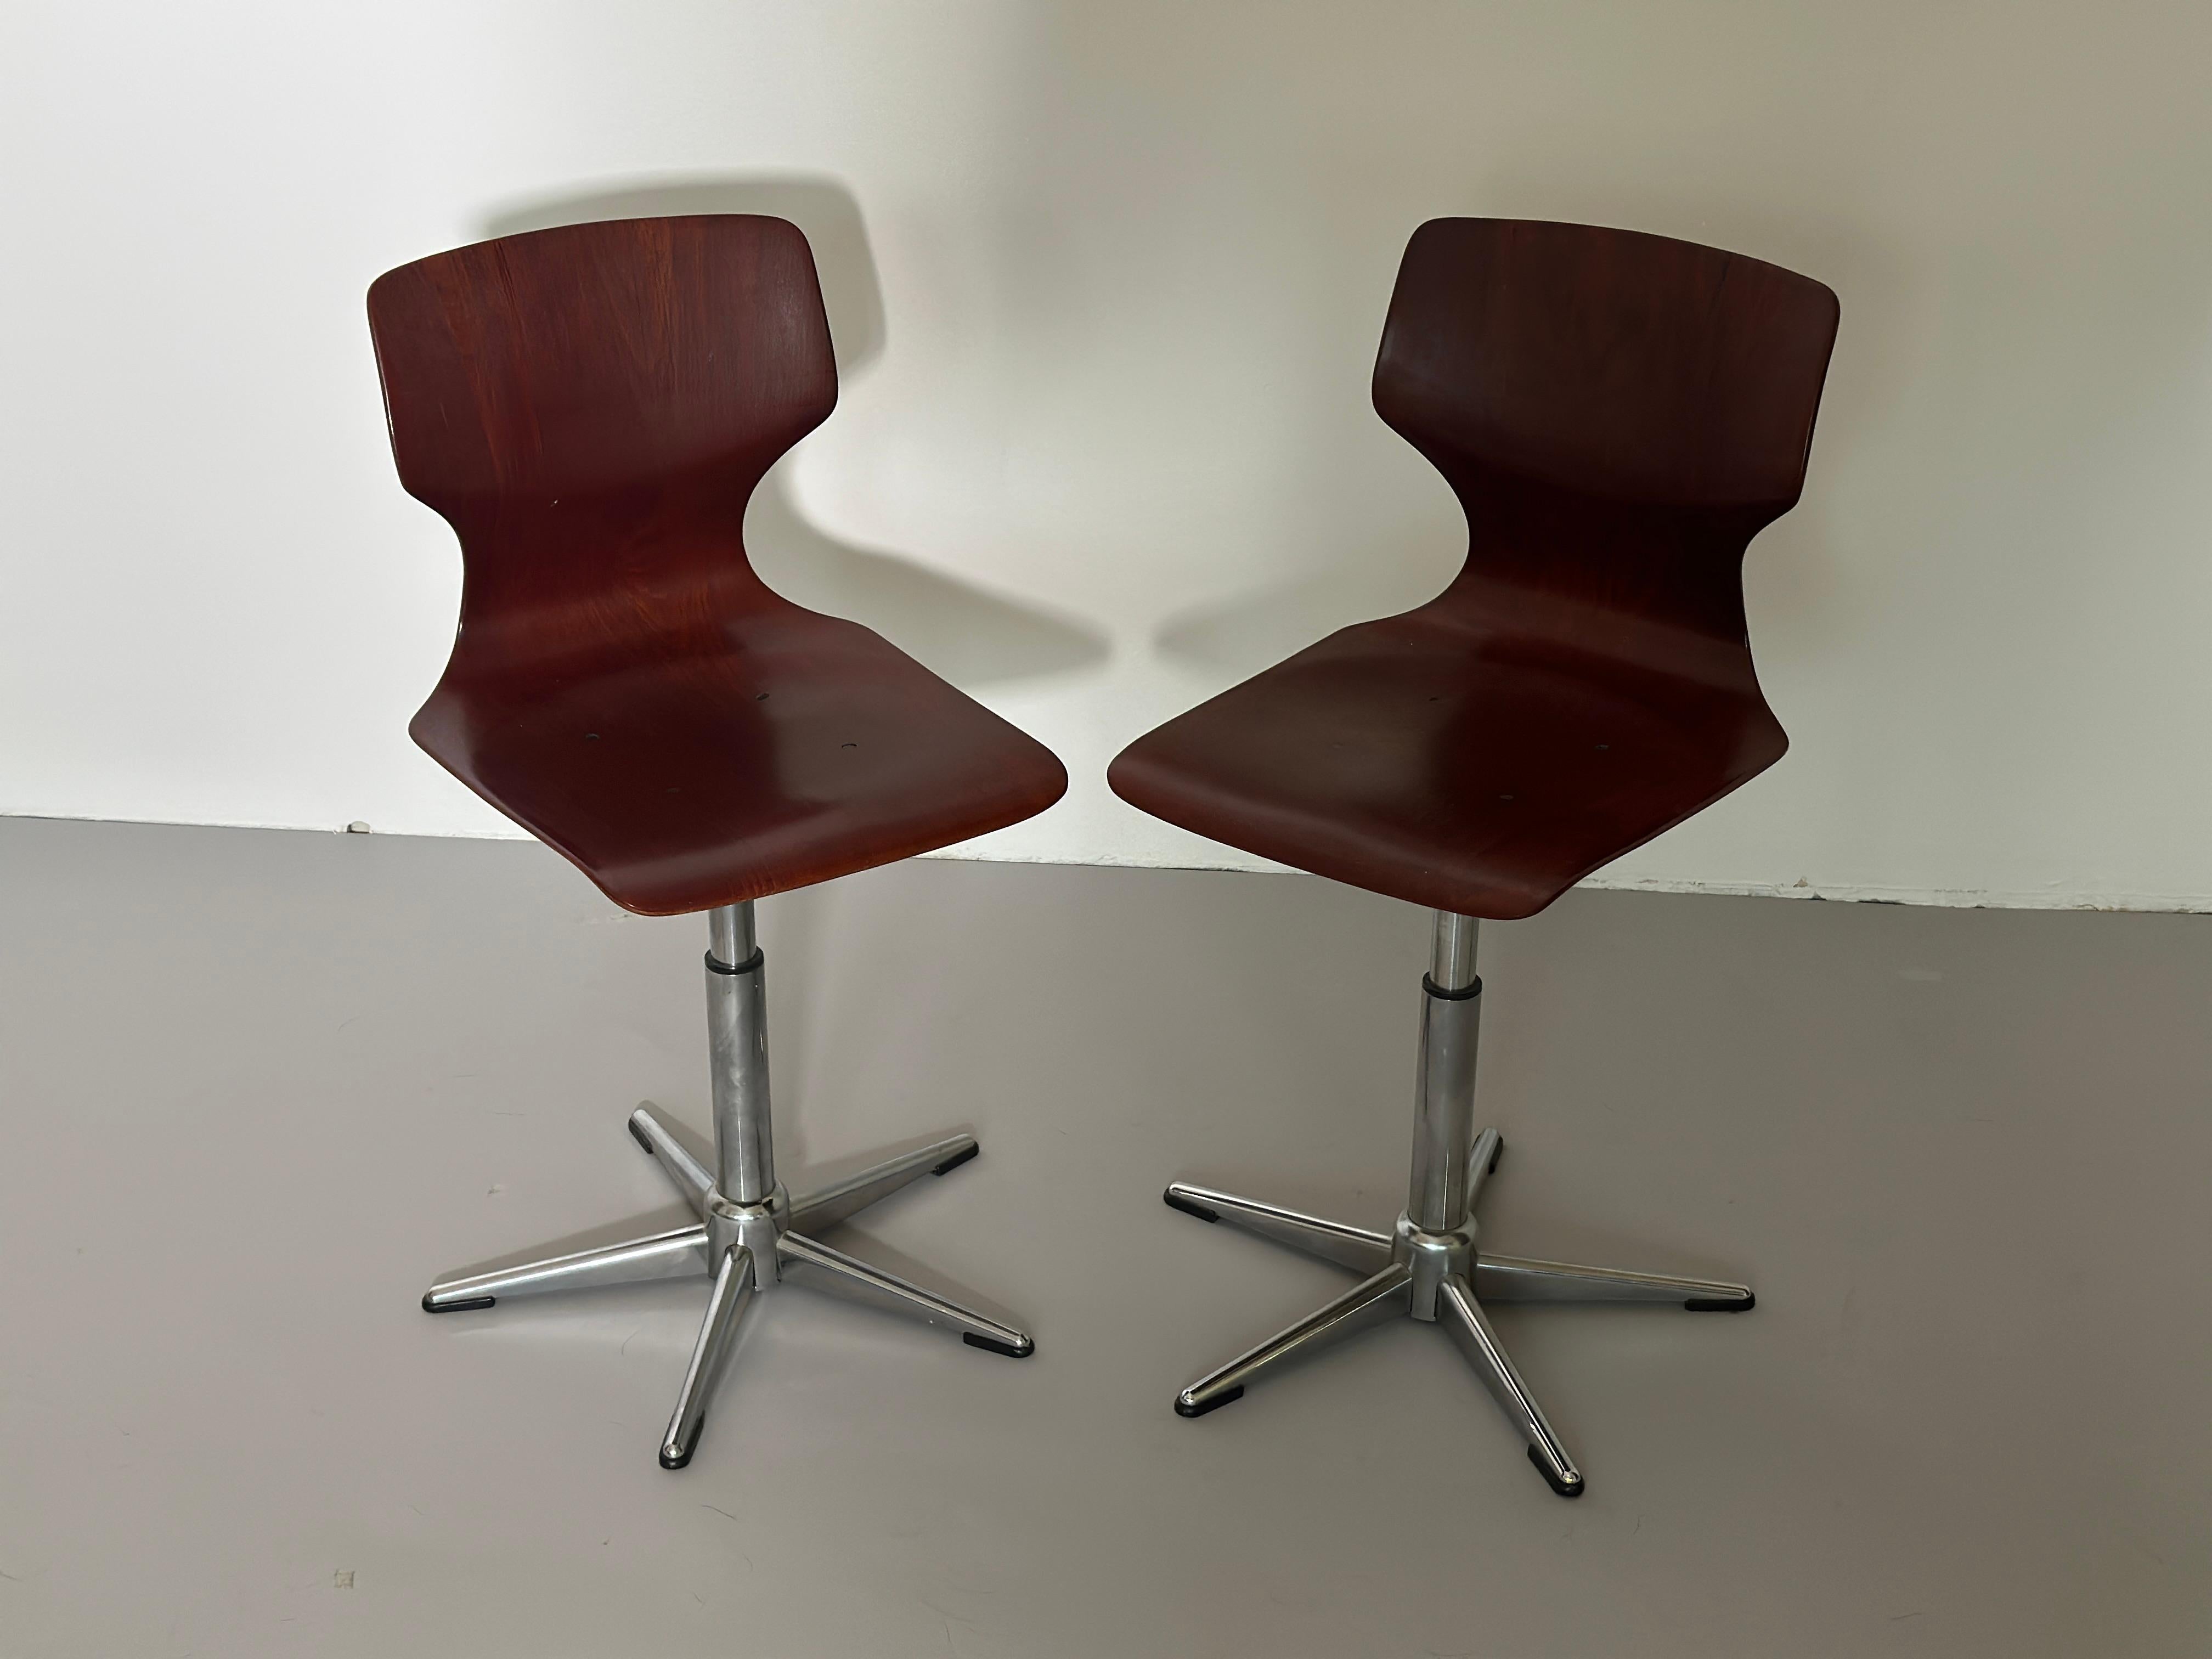 German One of Two Lugi Colani Space Age Desk Chairs for Flototto 1970s For Sale